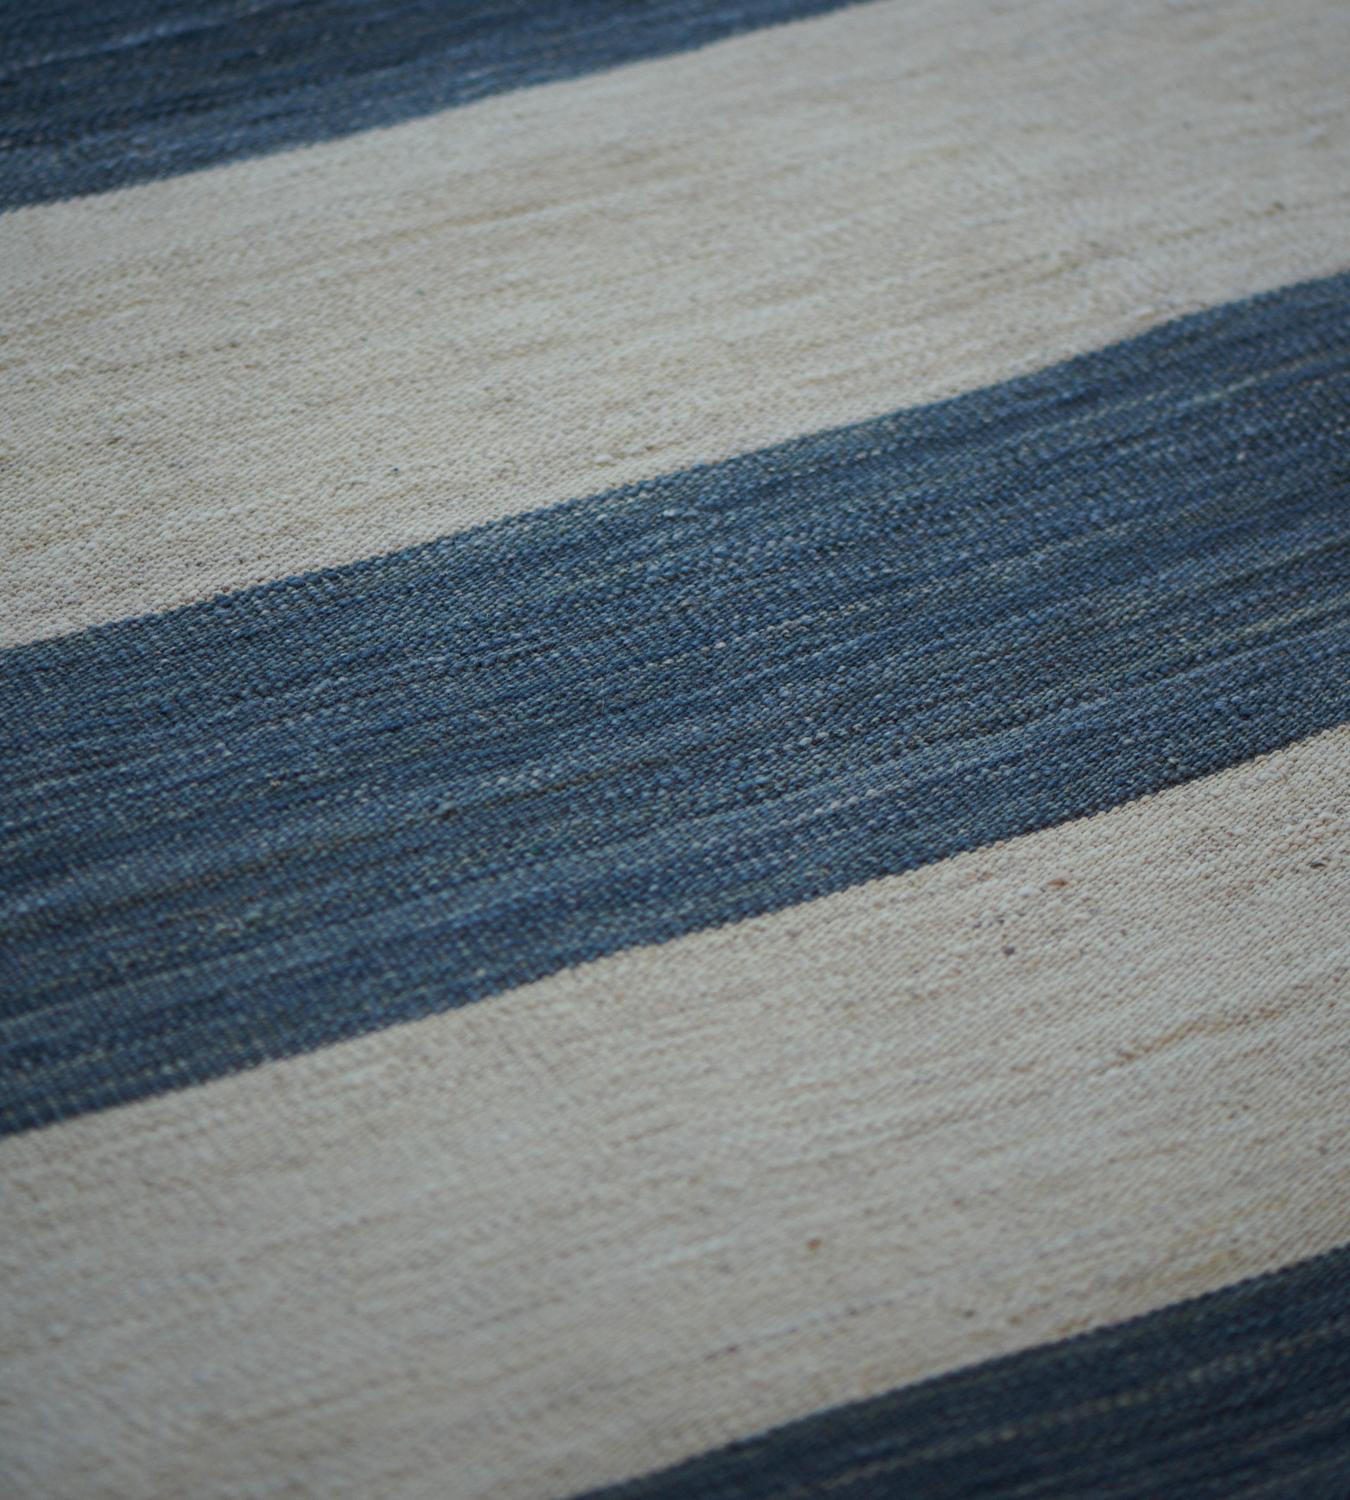 Masterful flat-weave construction creates an ideal canvas to appreciate the tonal nuance of this handwoven striped wool Mansour Modern rug.